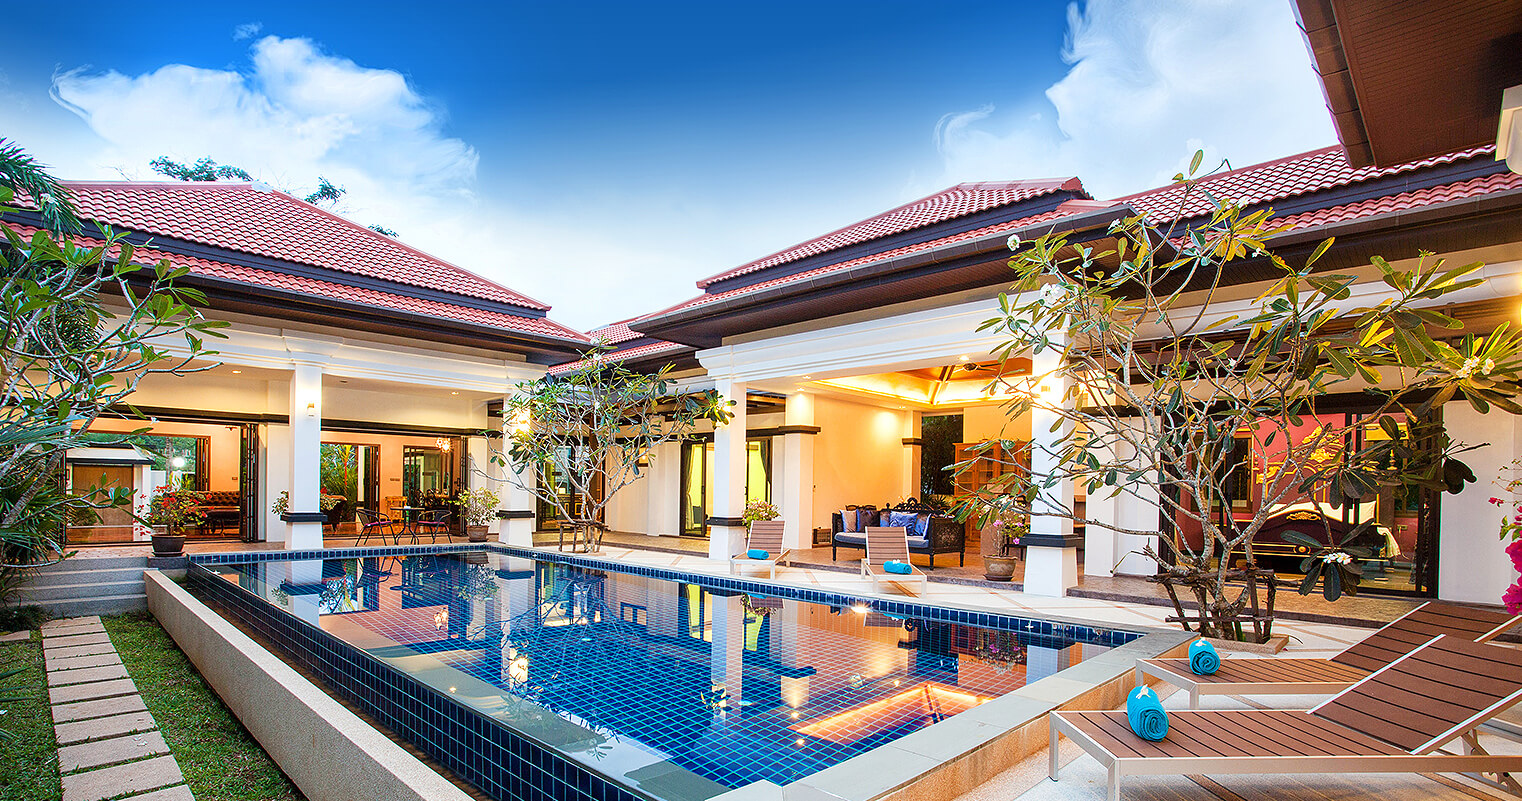 Beautiful house with swimming pool